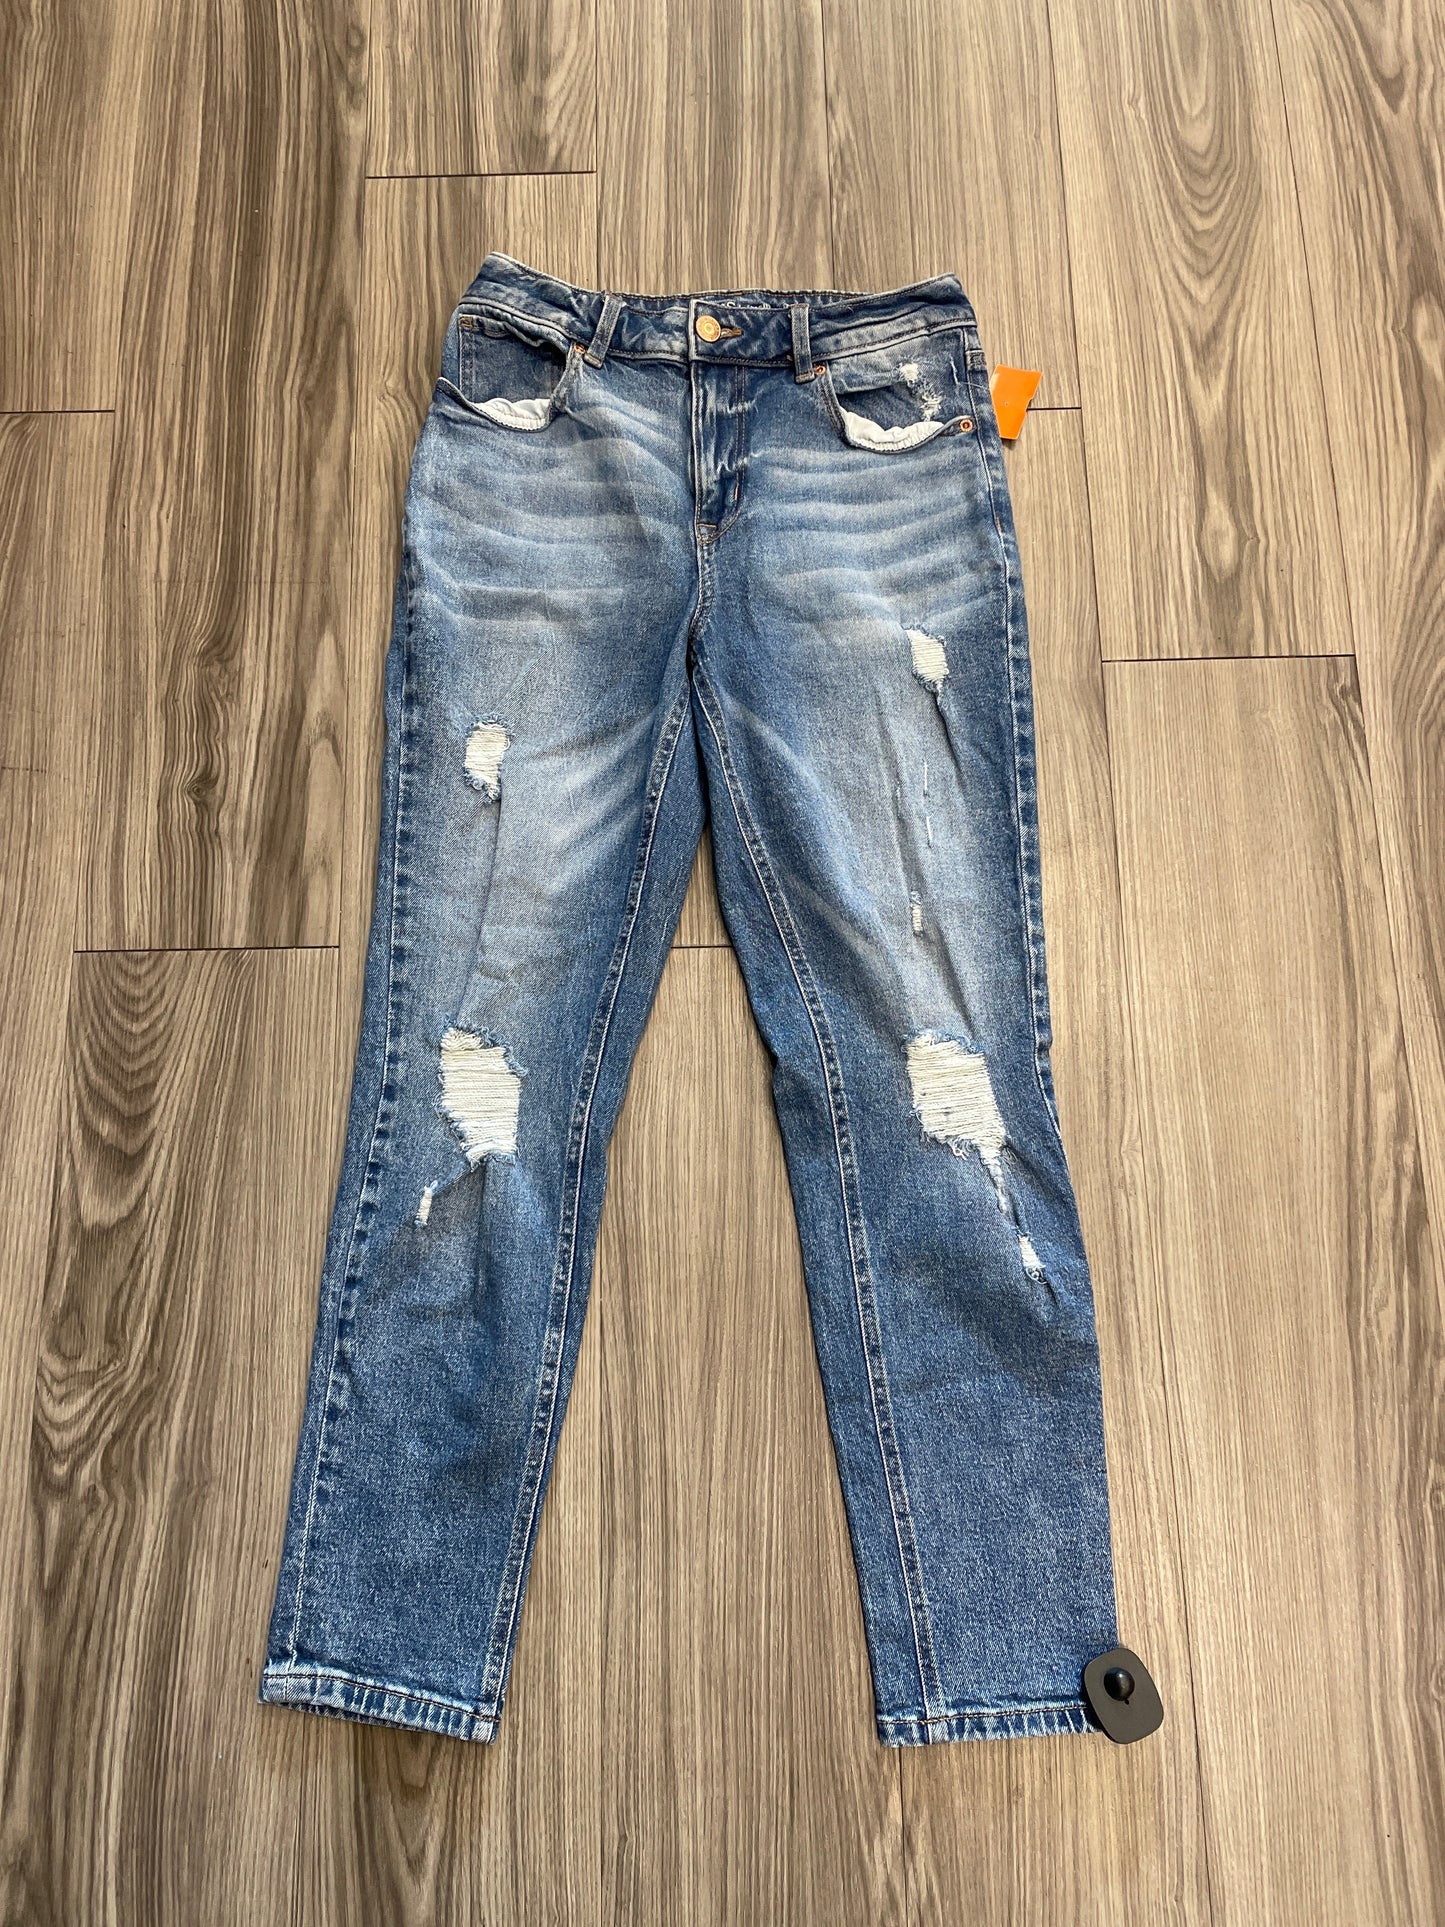 Jeans Boyfriend By Maurices  Size: 8